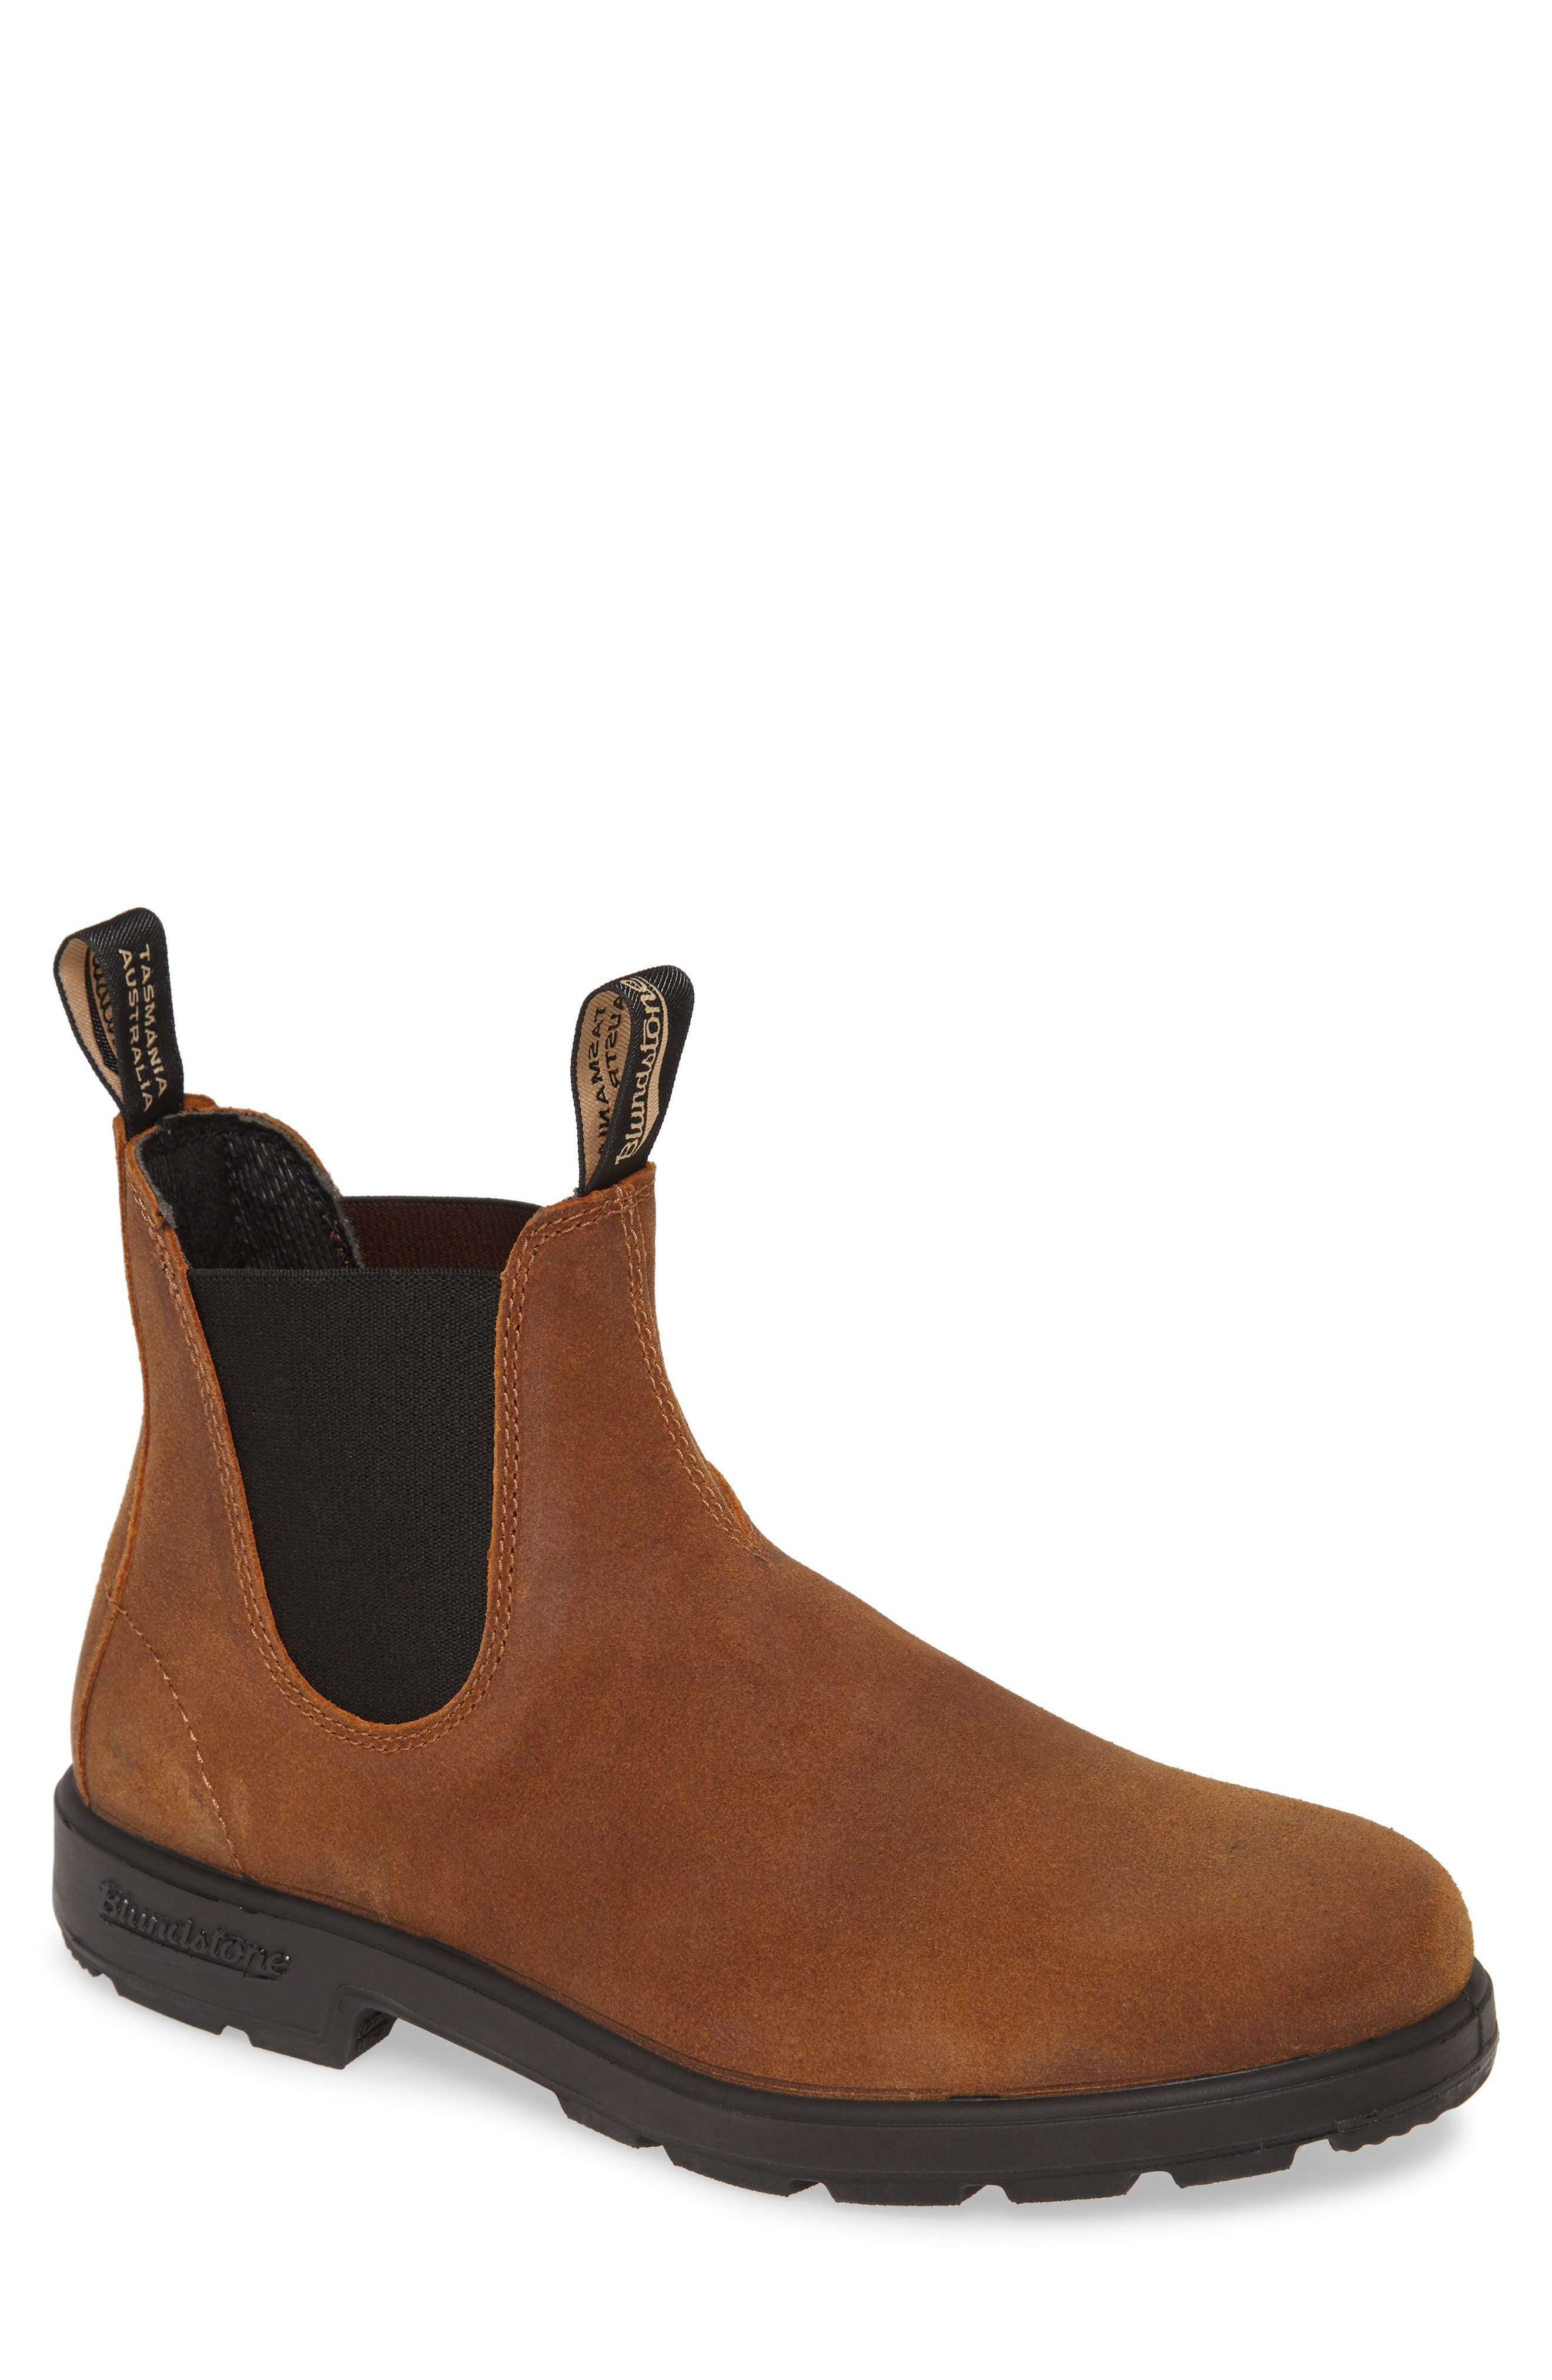 blundstone boots clearance